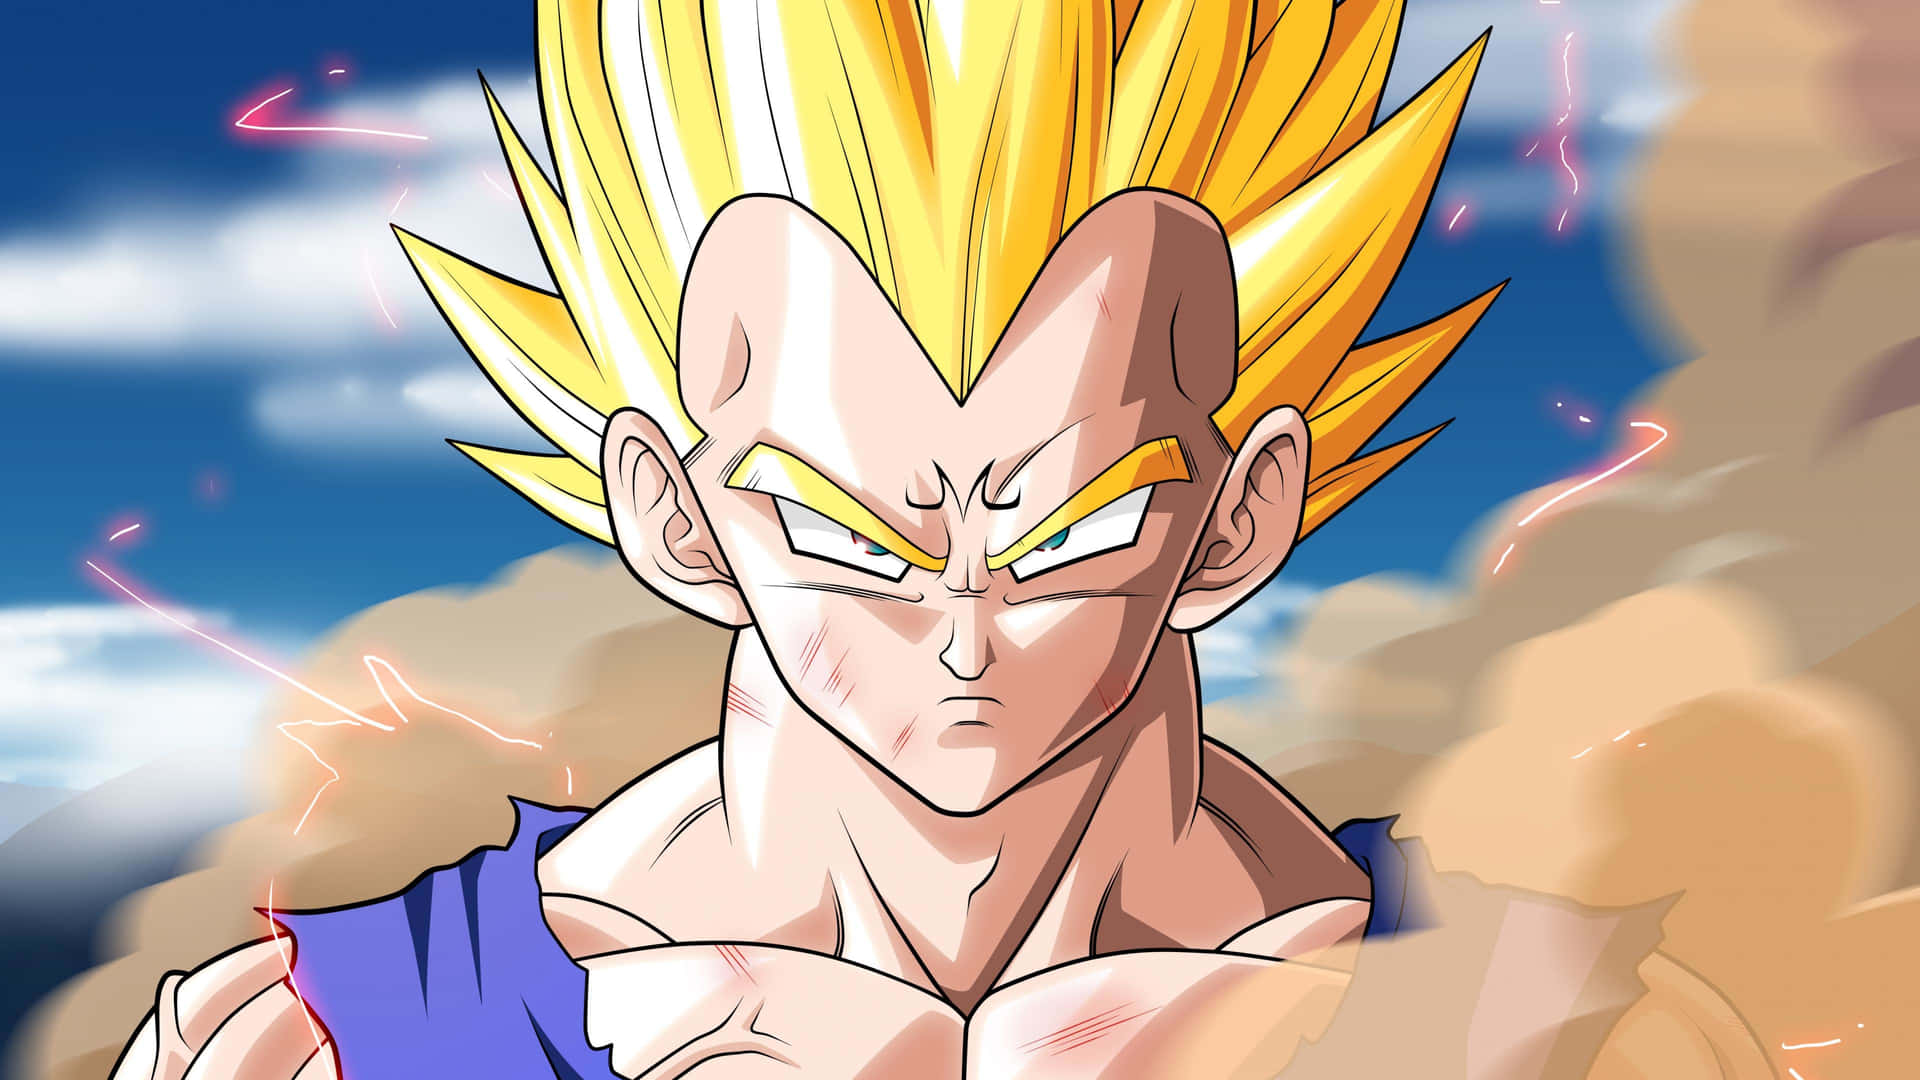 Improve your gaming experience with Dragon Ball Z 4k PC Wallpaper